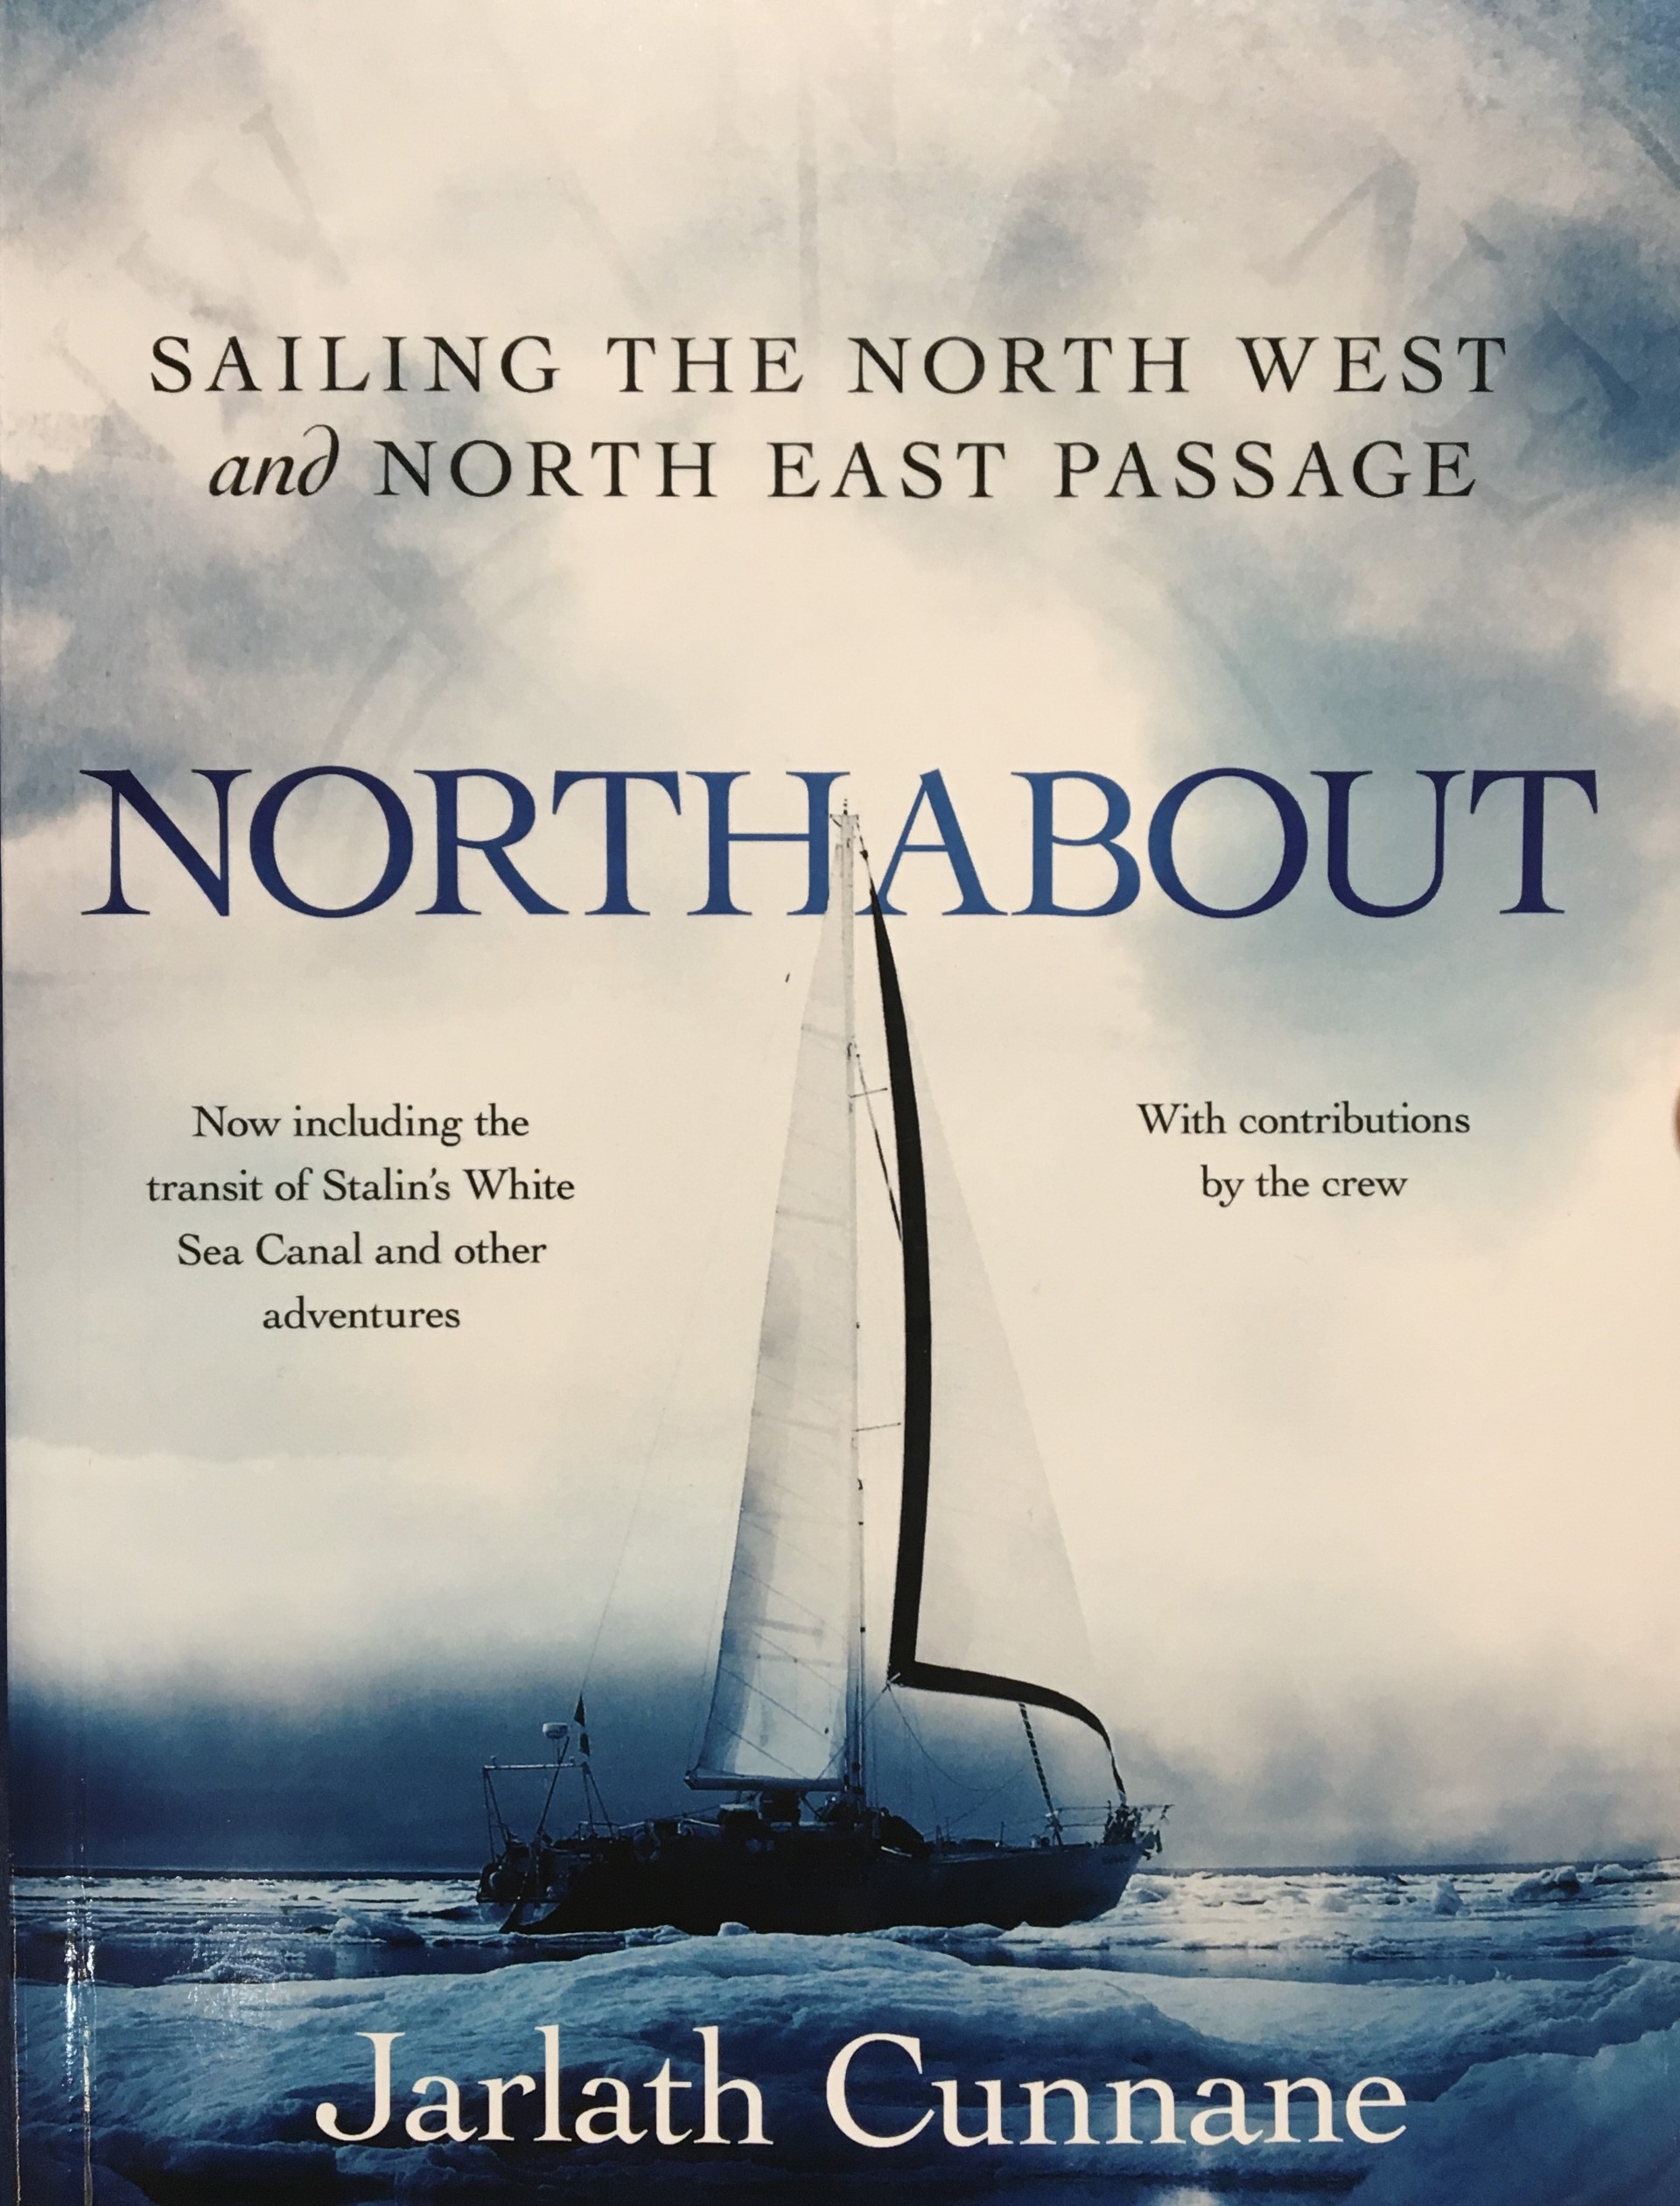 North About : Sailing the North West and North East Passage by Jarlath Cunnane